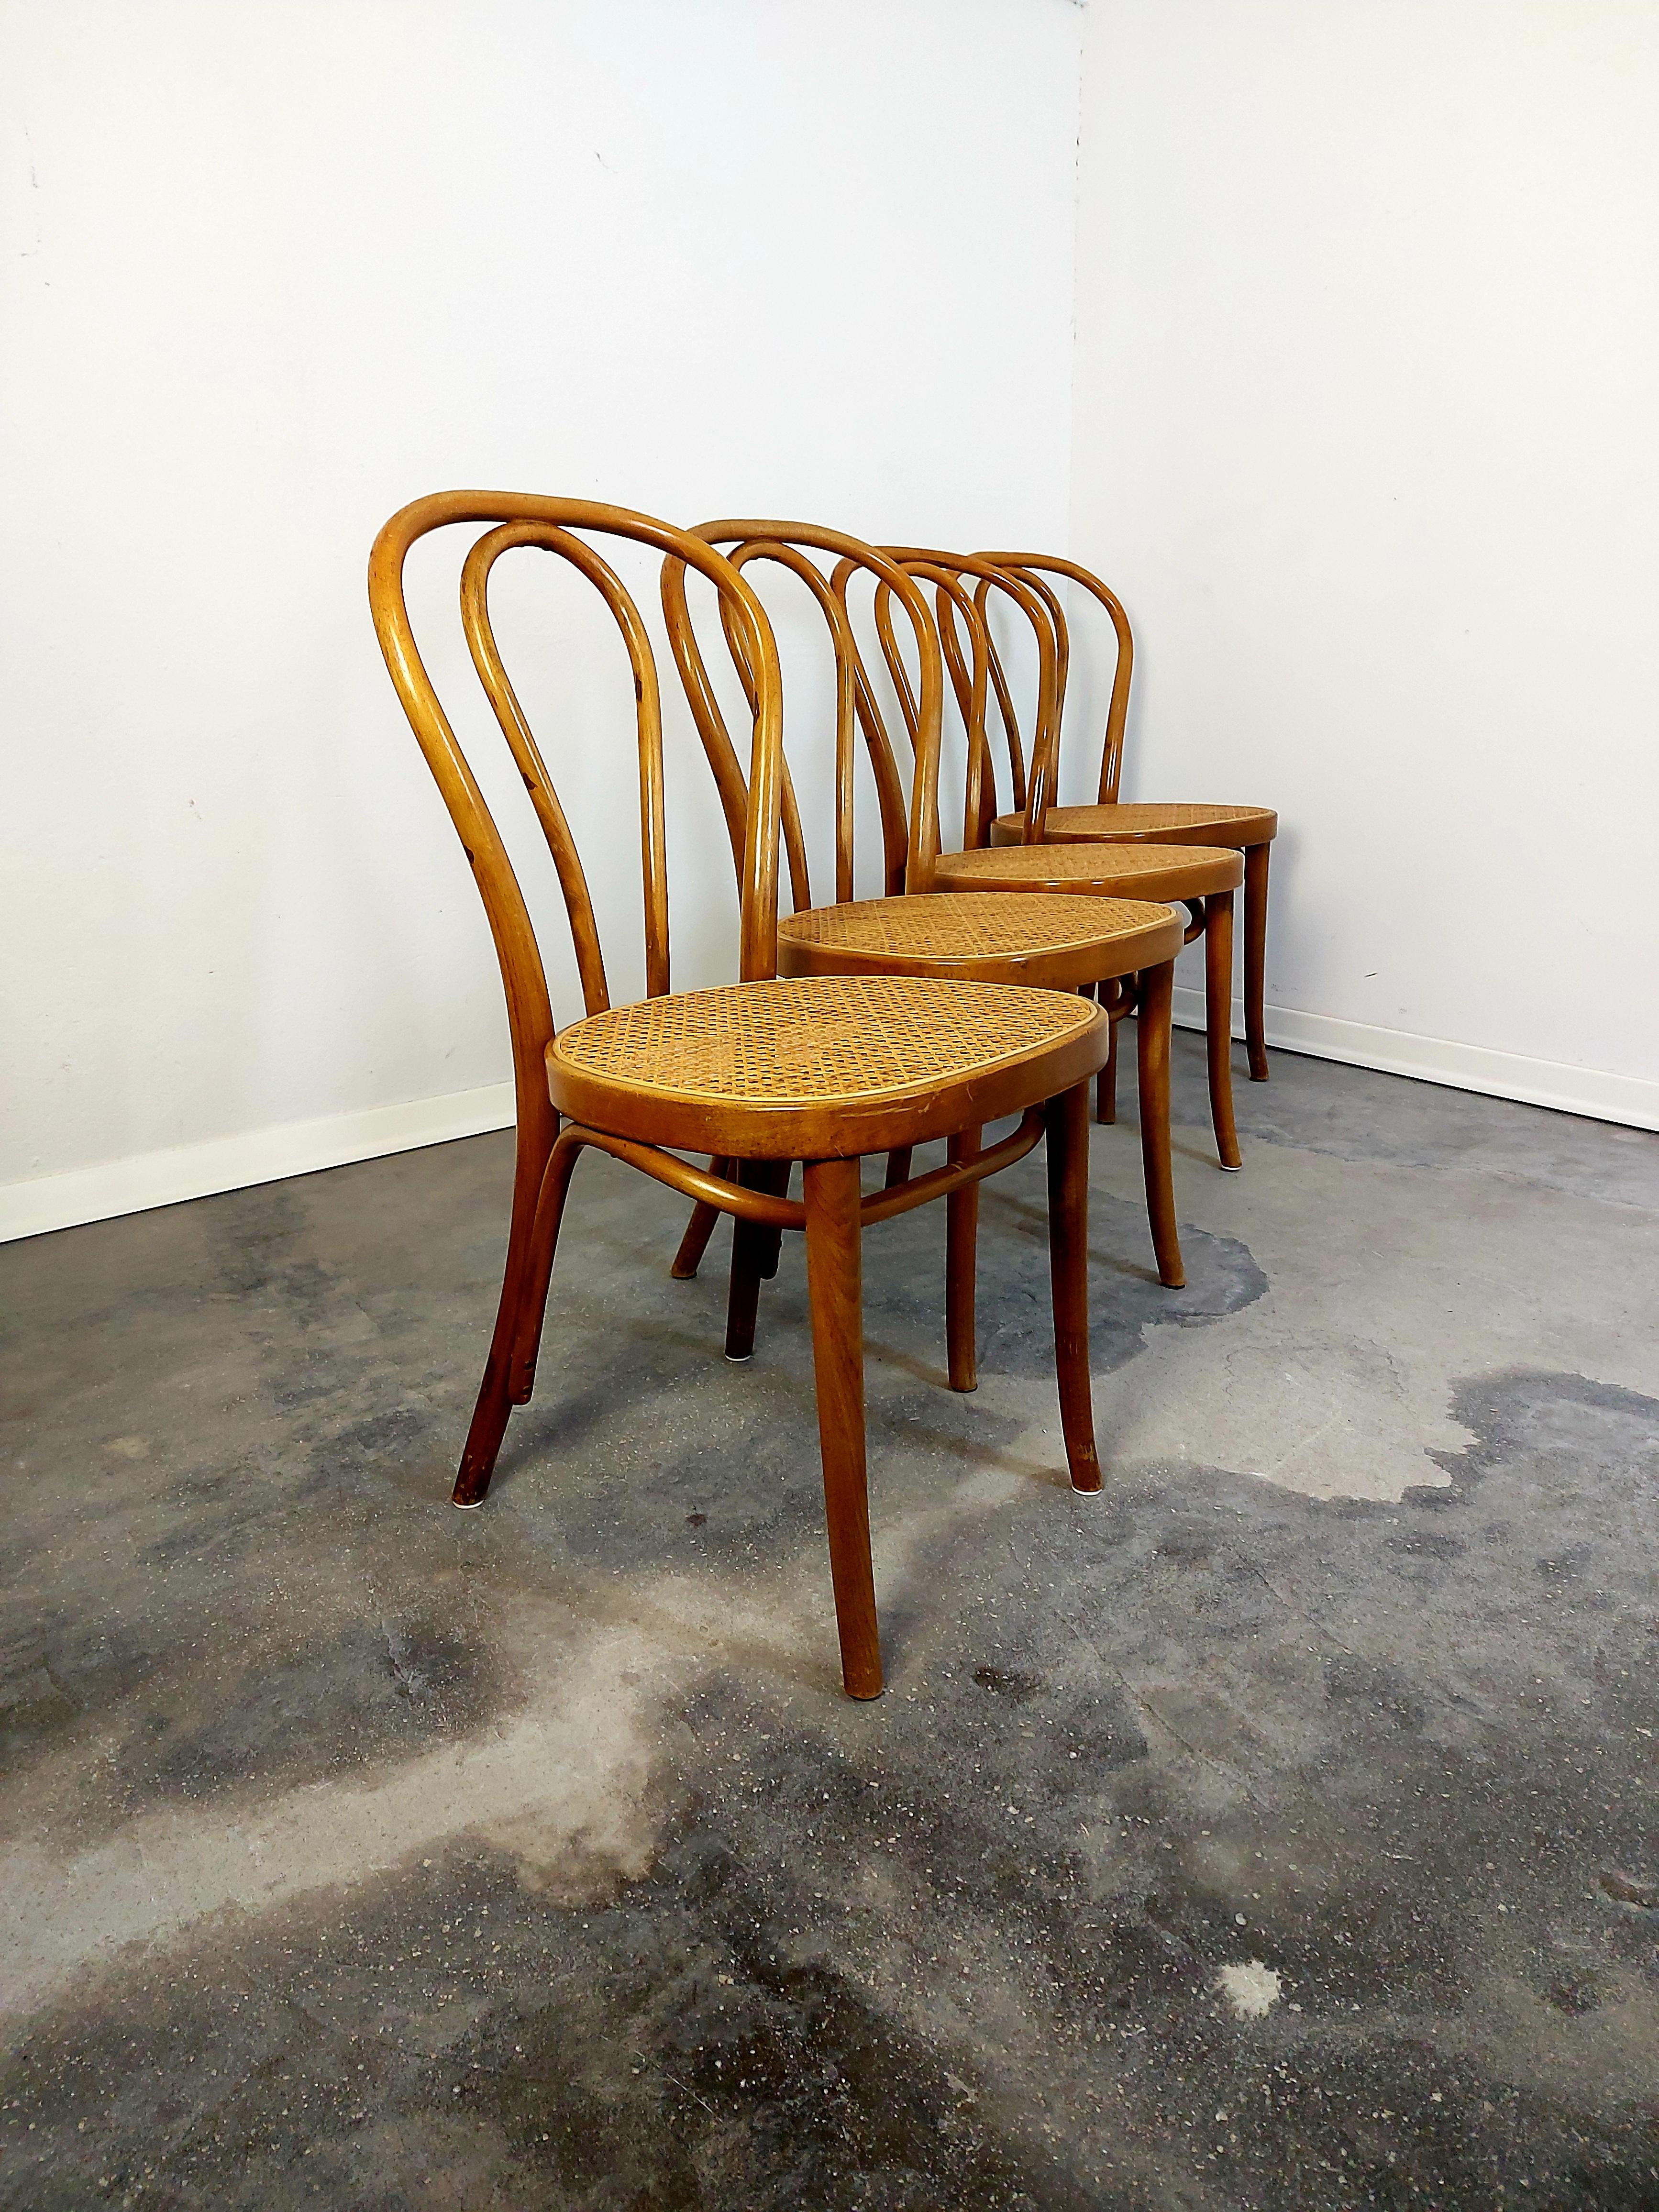 Bentwood cane Thonet No. 18 dining chair in great vintage condition (well preserved).
Production period: 1960s
Materials: Bentwood, cane
Condition: great, signs of use, undamaged
Colour: Light brown
Price is for one chair.